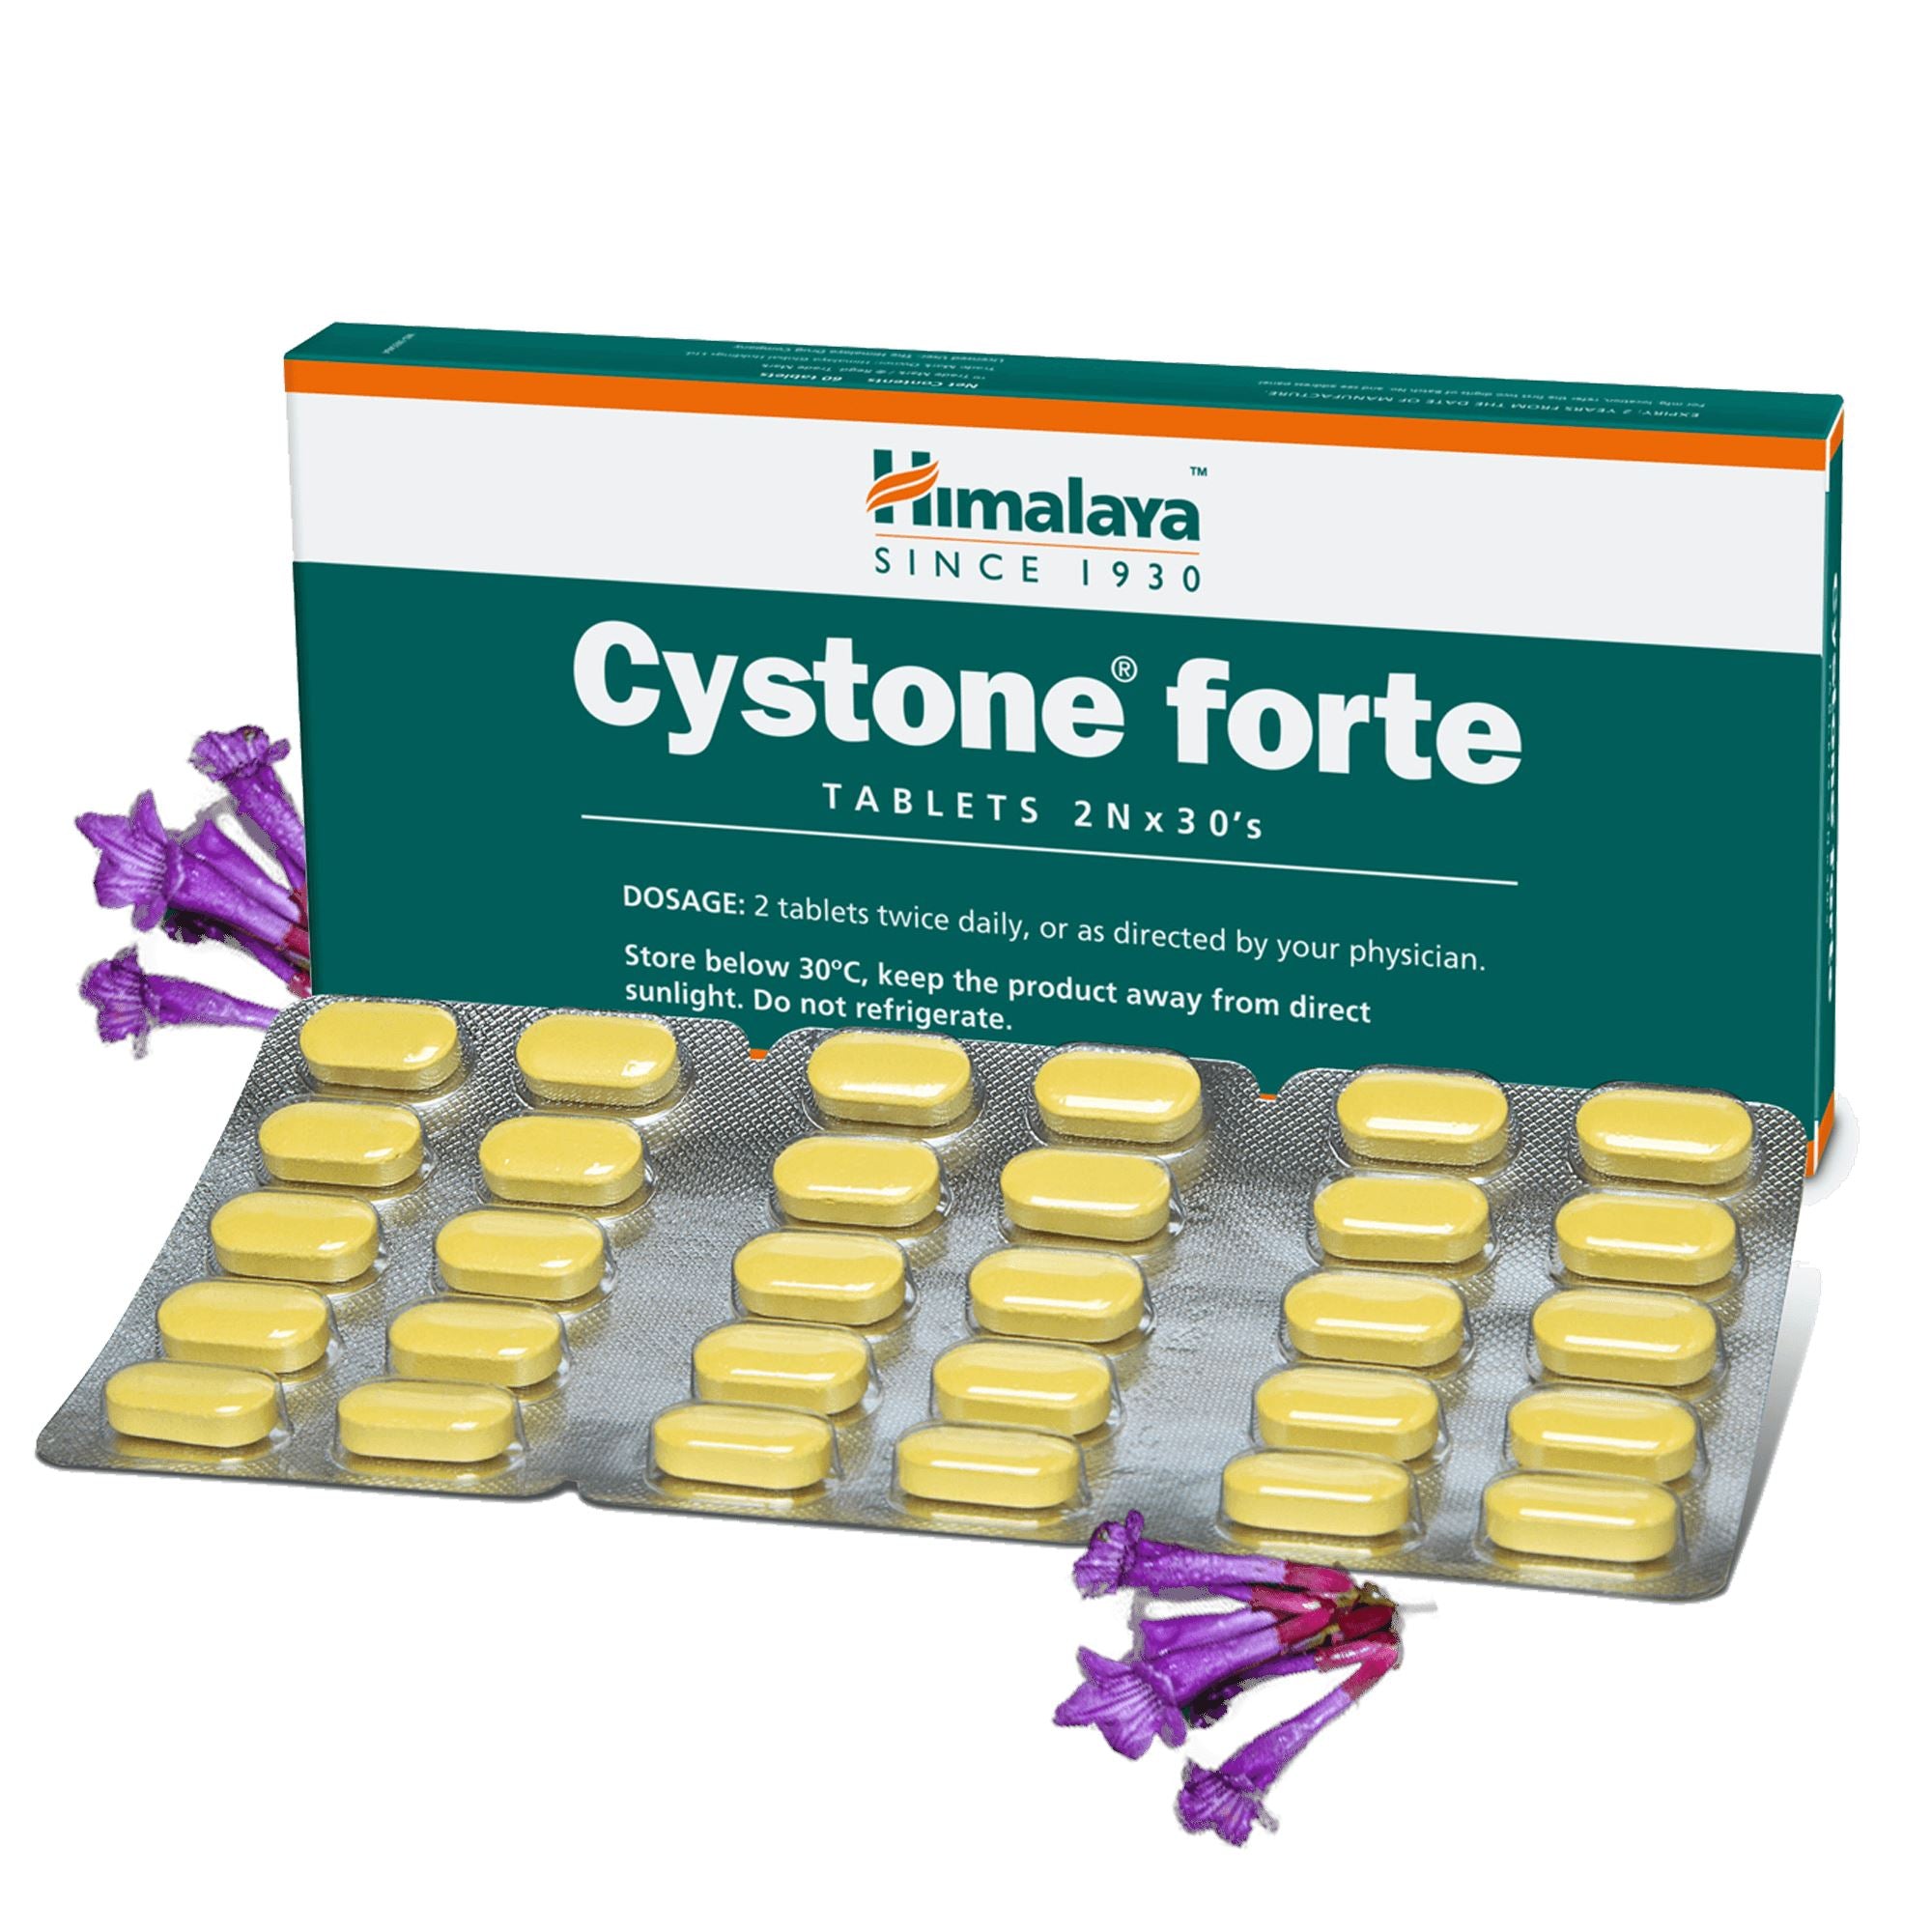 Himalaya Cystone forte - Tablets to manage kidney stones